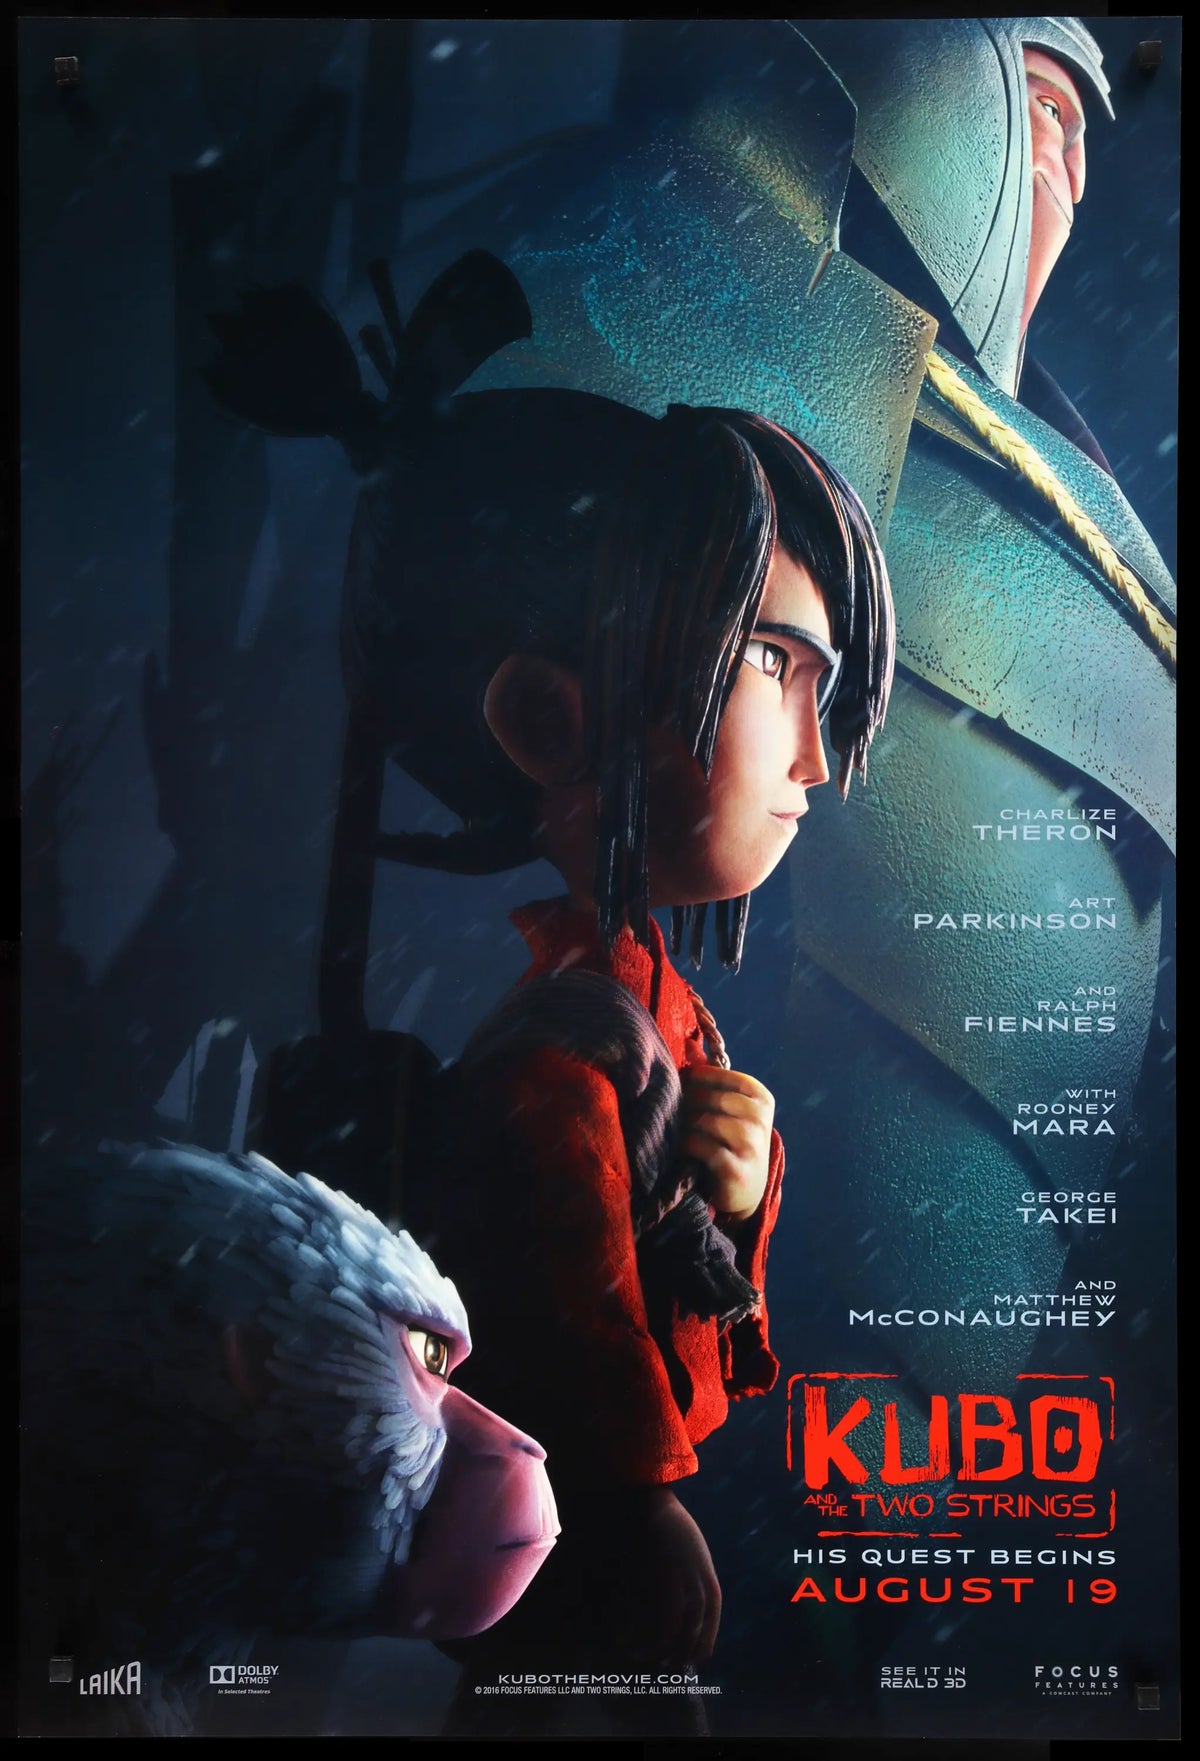 Kubo and the Two Strings (2016) original movie poster for sale at Original Film Art